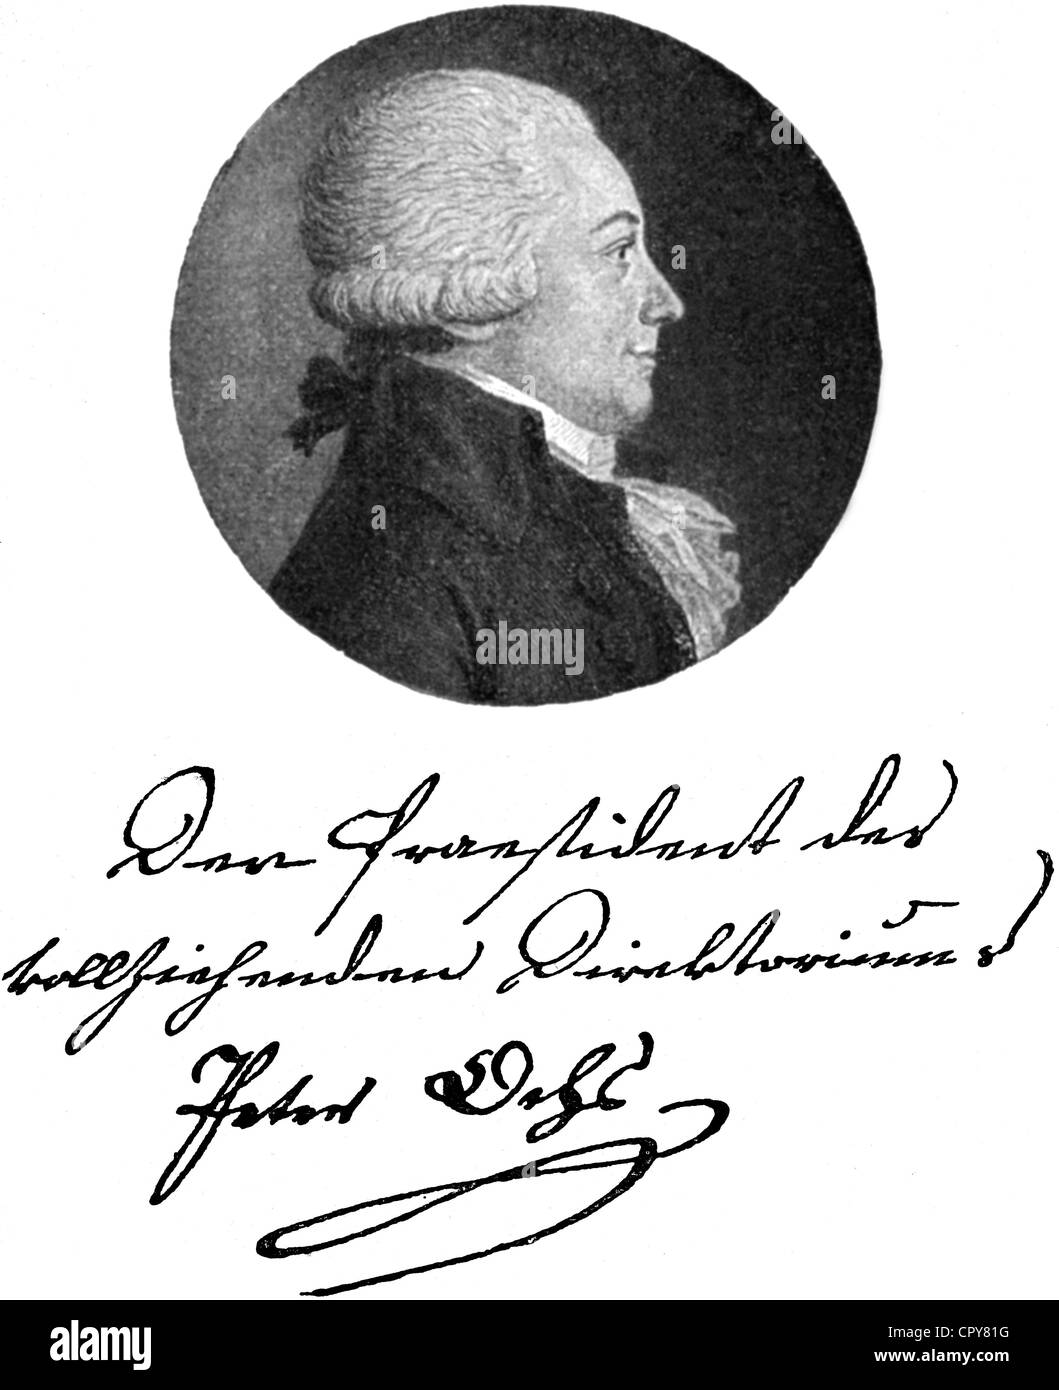 Ochs, Peter, 20.8.1753 - 19.6.1821, Swiss politician, historian, portrait, profile with signature, print based on an engraving, circa 1800, Stock Photo